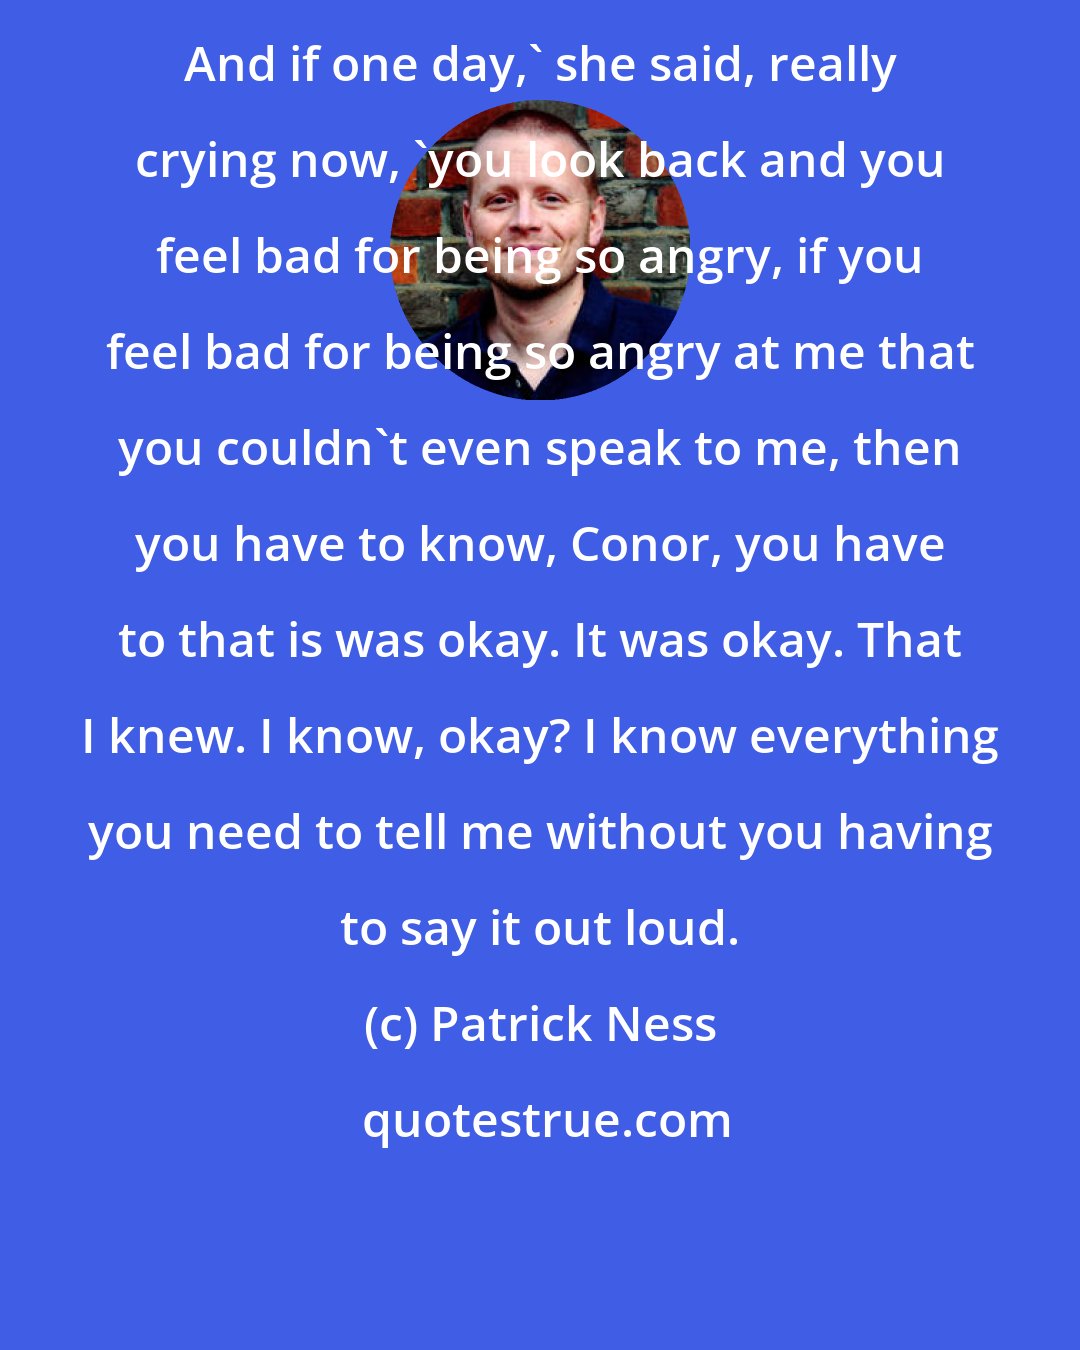 Patrick Ness: And if one day,' she said, really crying now, 'you look back and you feel bad for being so angry, if you feel bad for being so angry at me that you couldn't even speak to me, then you have to know, Conor, you have to that is was okay. It was okay. That I knew. I know, okay? I know everything you need to tell me without you having to say it out loud.